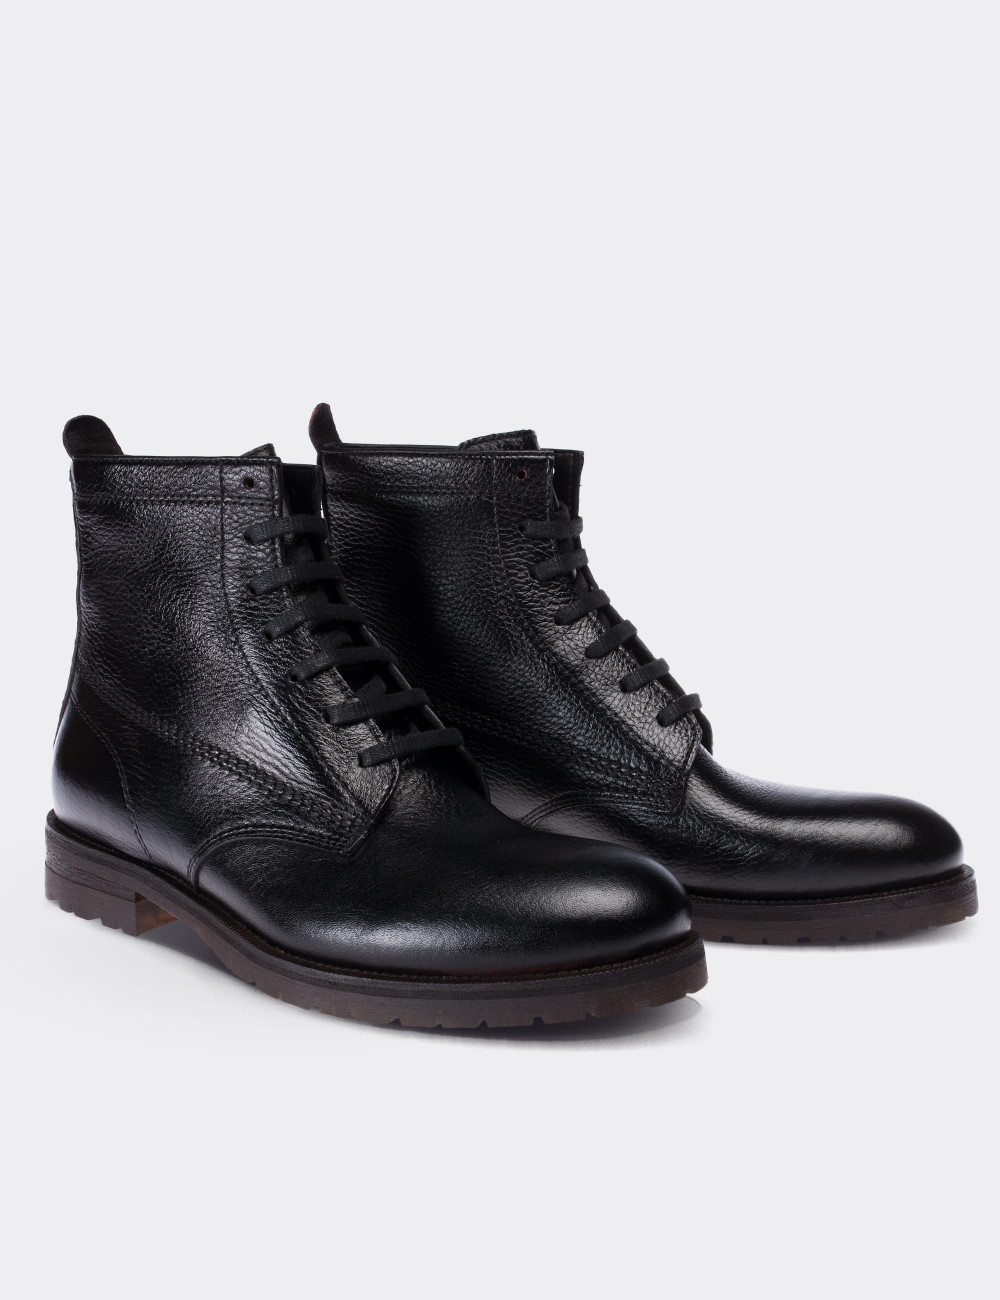 Black  Leather Boots - 01513MSYHC01